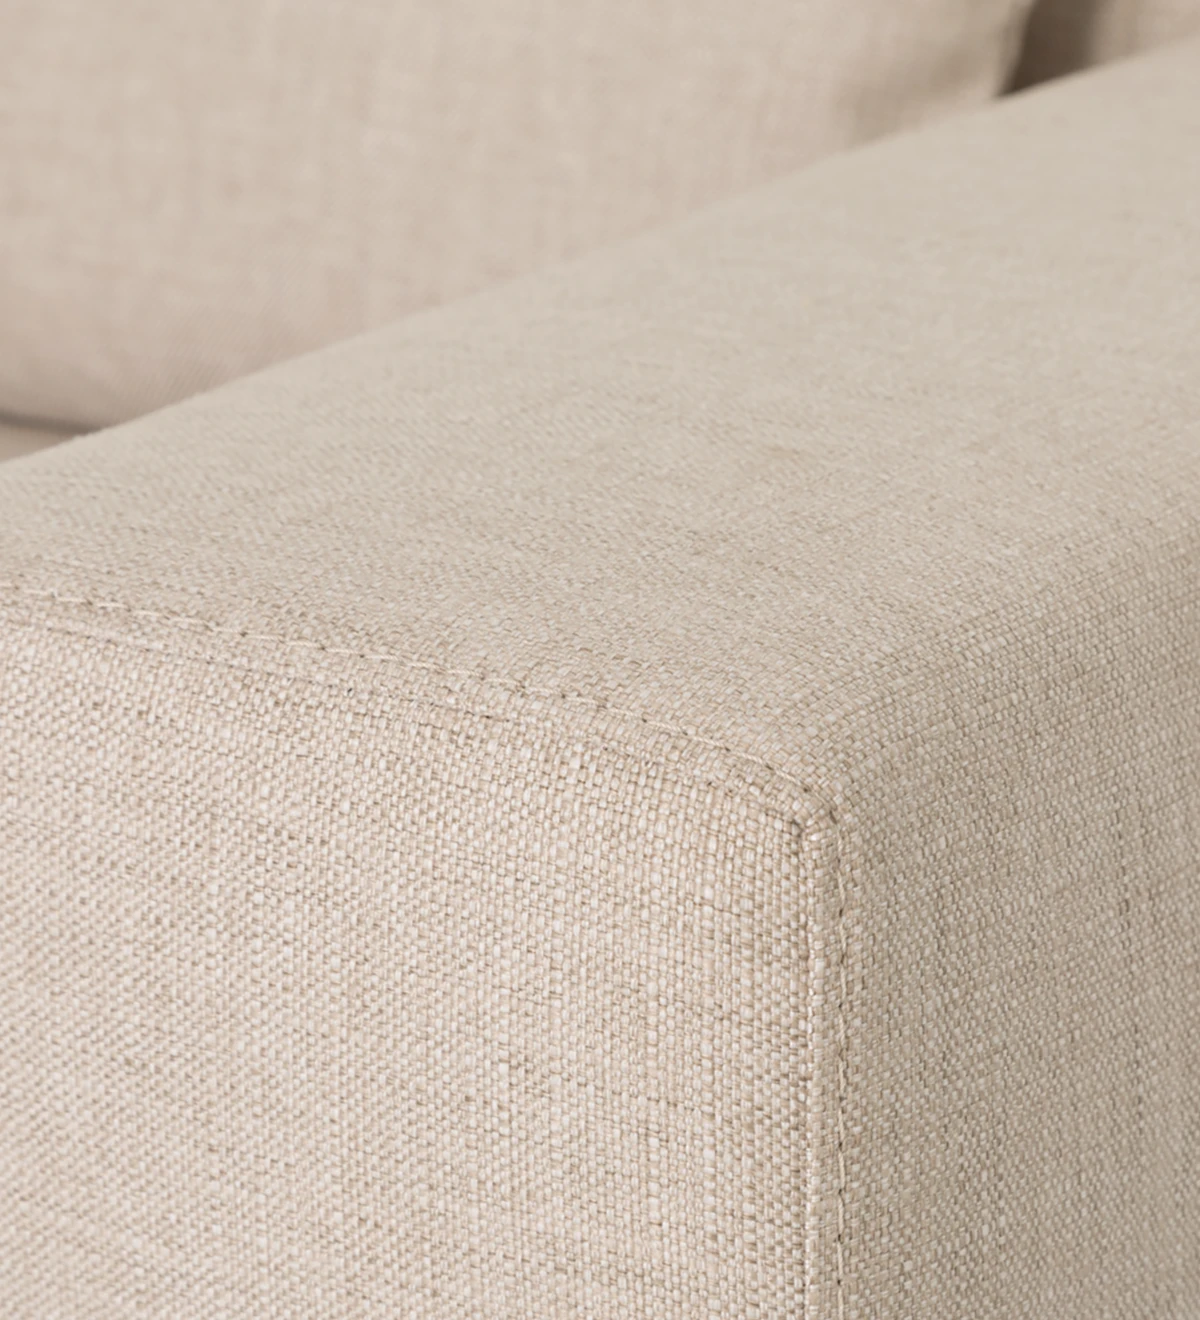 Maple upholstered in fabric.